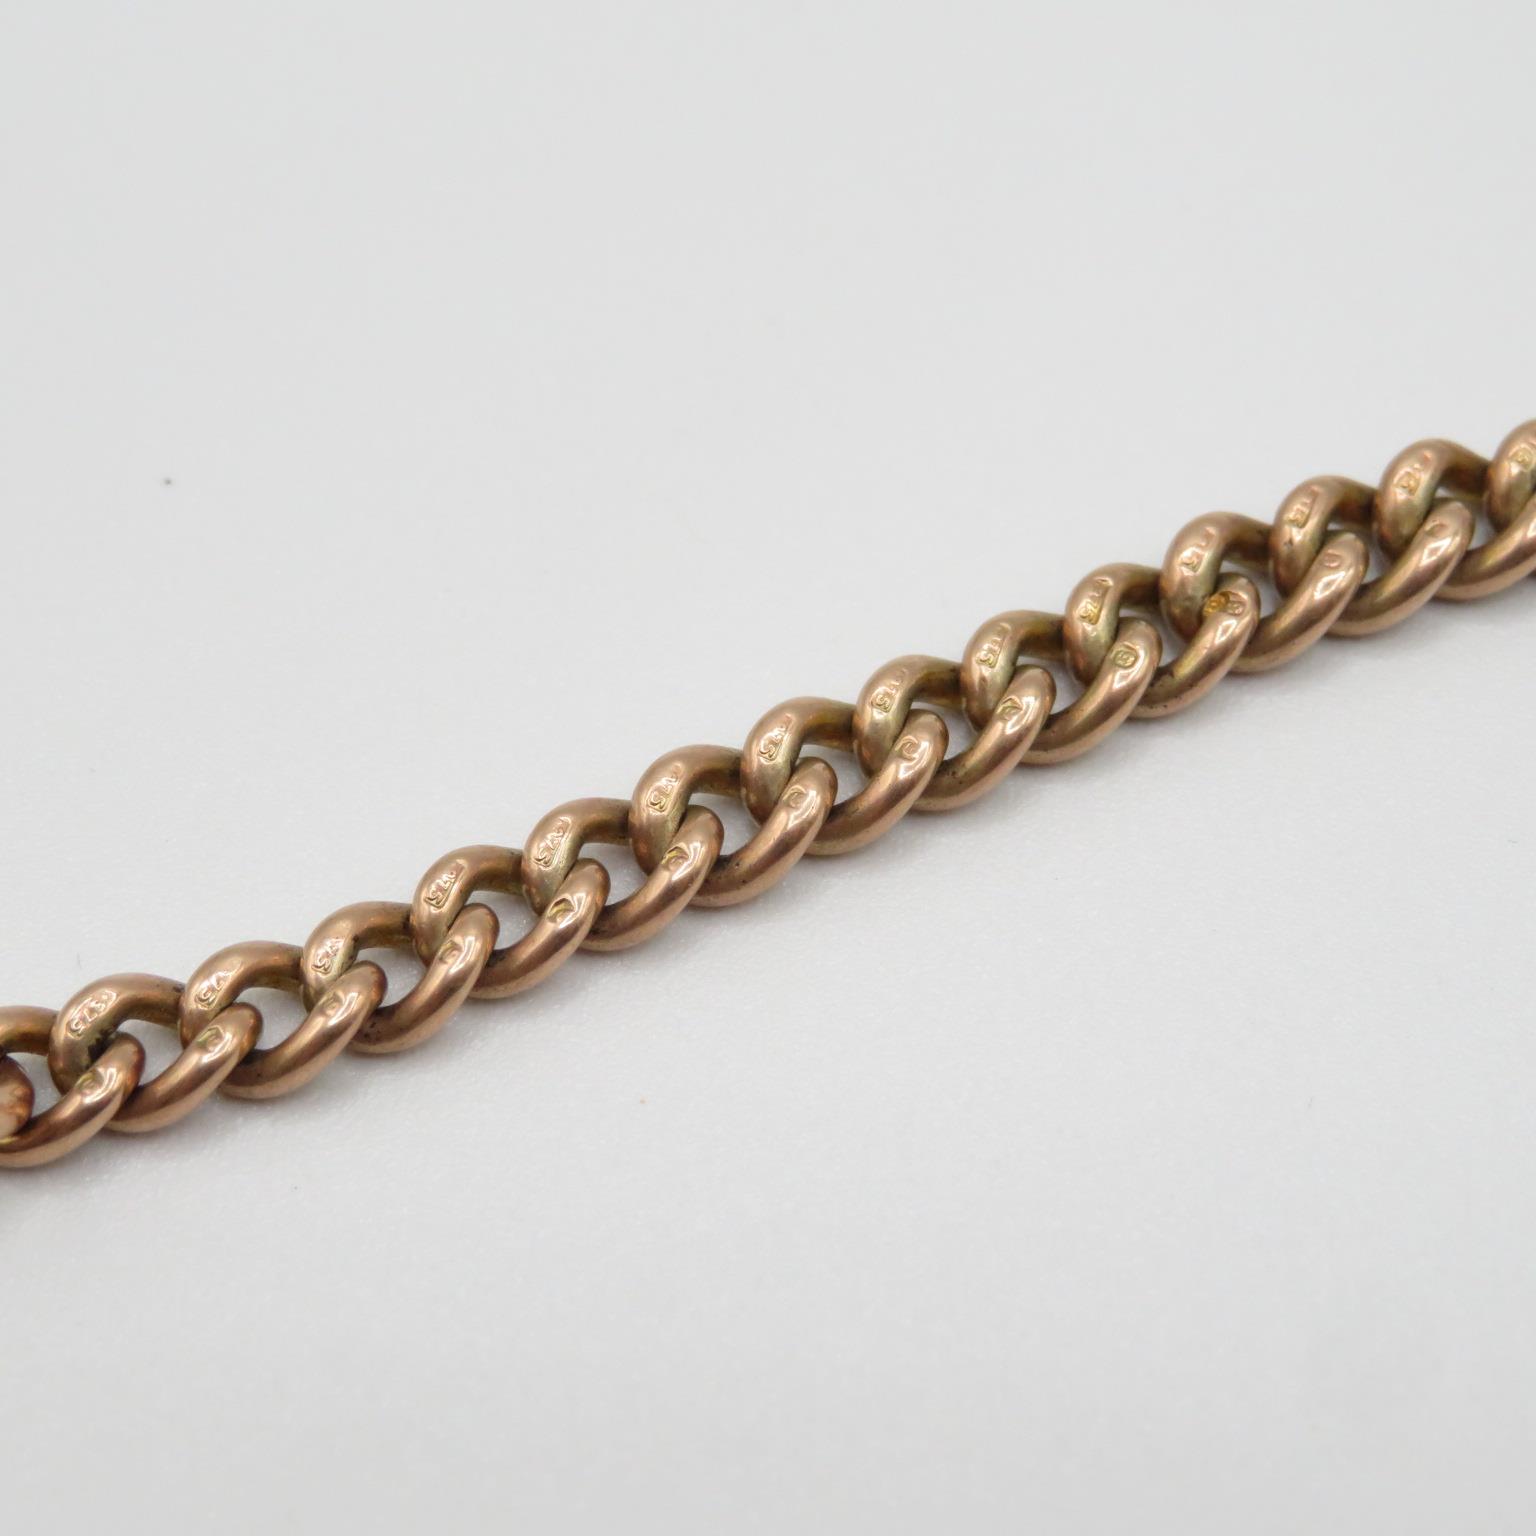 Rose Gold watch chain 51.5g with T bar 13" long - Image 3 of 4